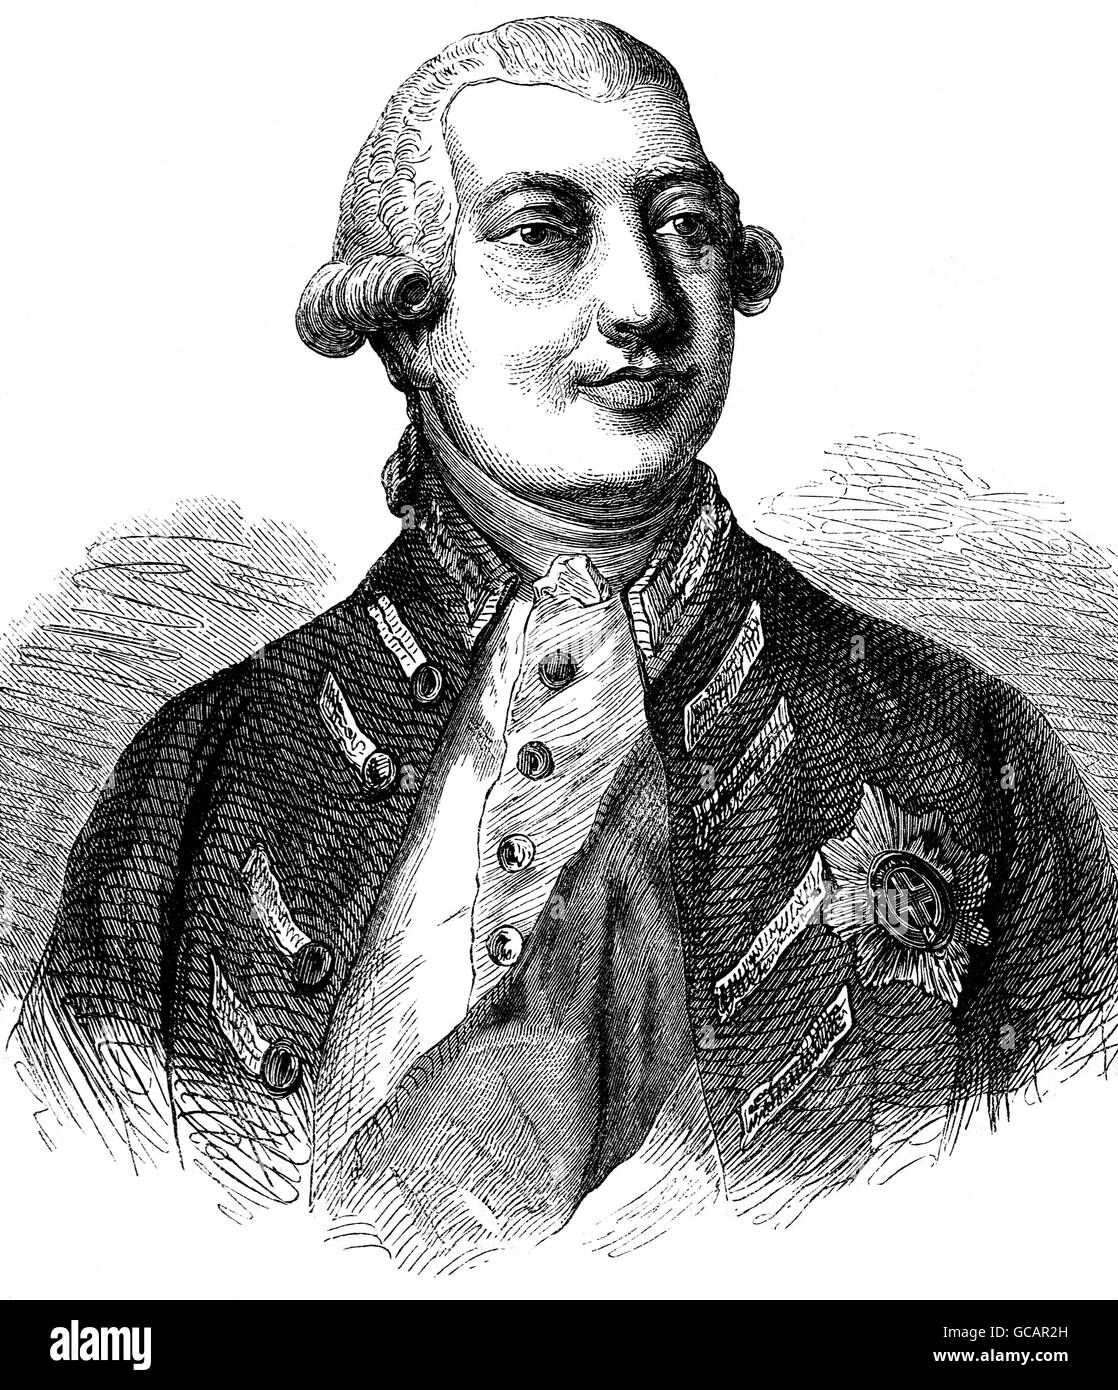 George III (1738 – 1820), King of England and Scotland from 25 October 1760 until the Act of Union on 1 January 1801, after which he was King of the United Kingdom of Great Britain and Ireland until his death. He was the third British monarch of the House of Hanover, but unlike his two predecessors he was born in Britain, spoke English as his first language, and never visited Hanover. Stock Photo